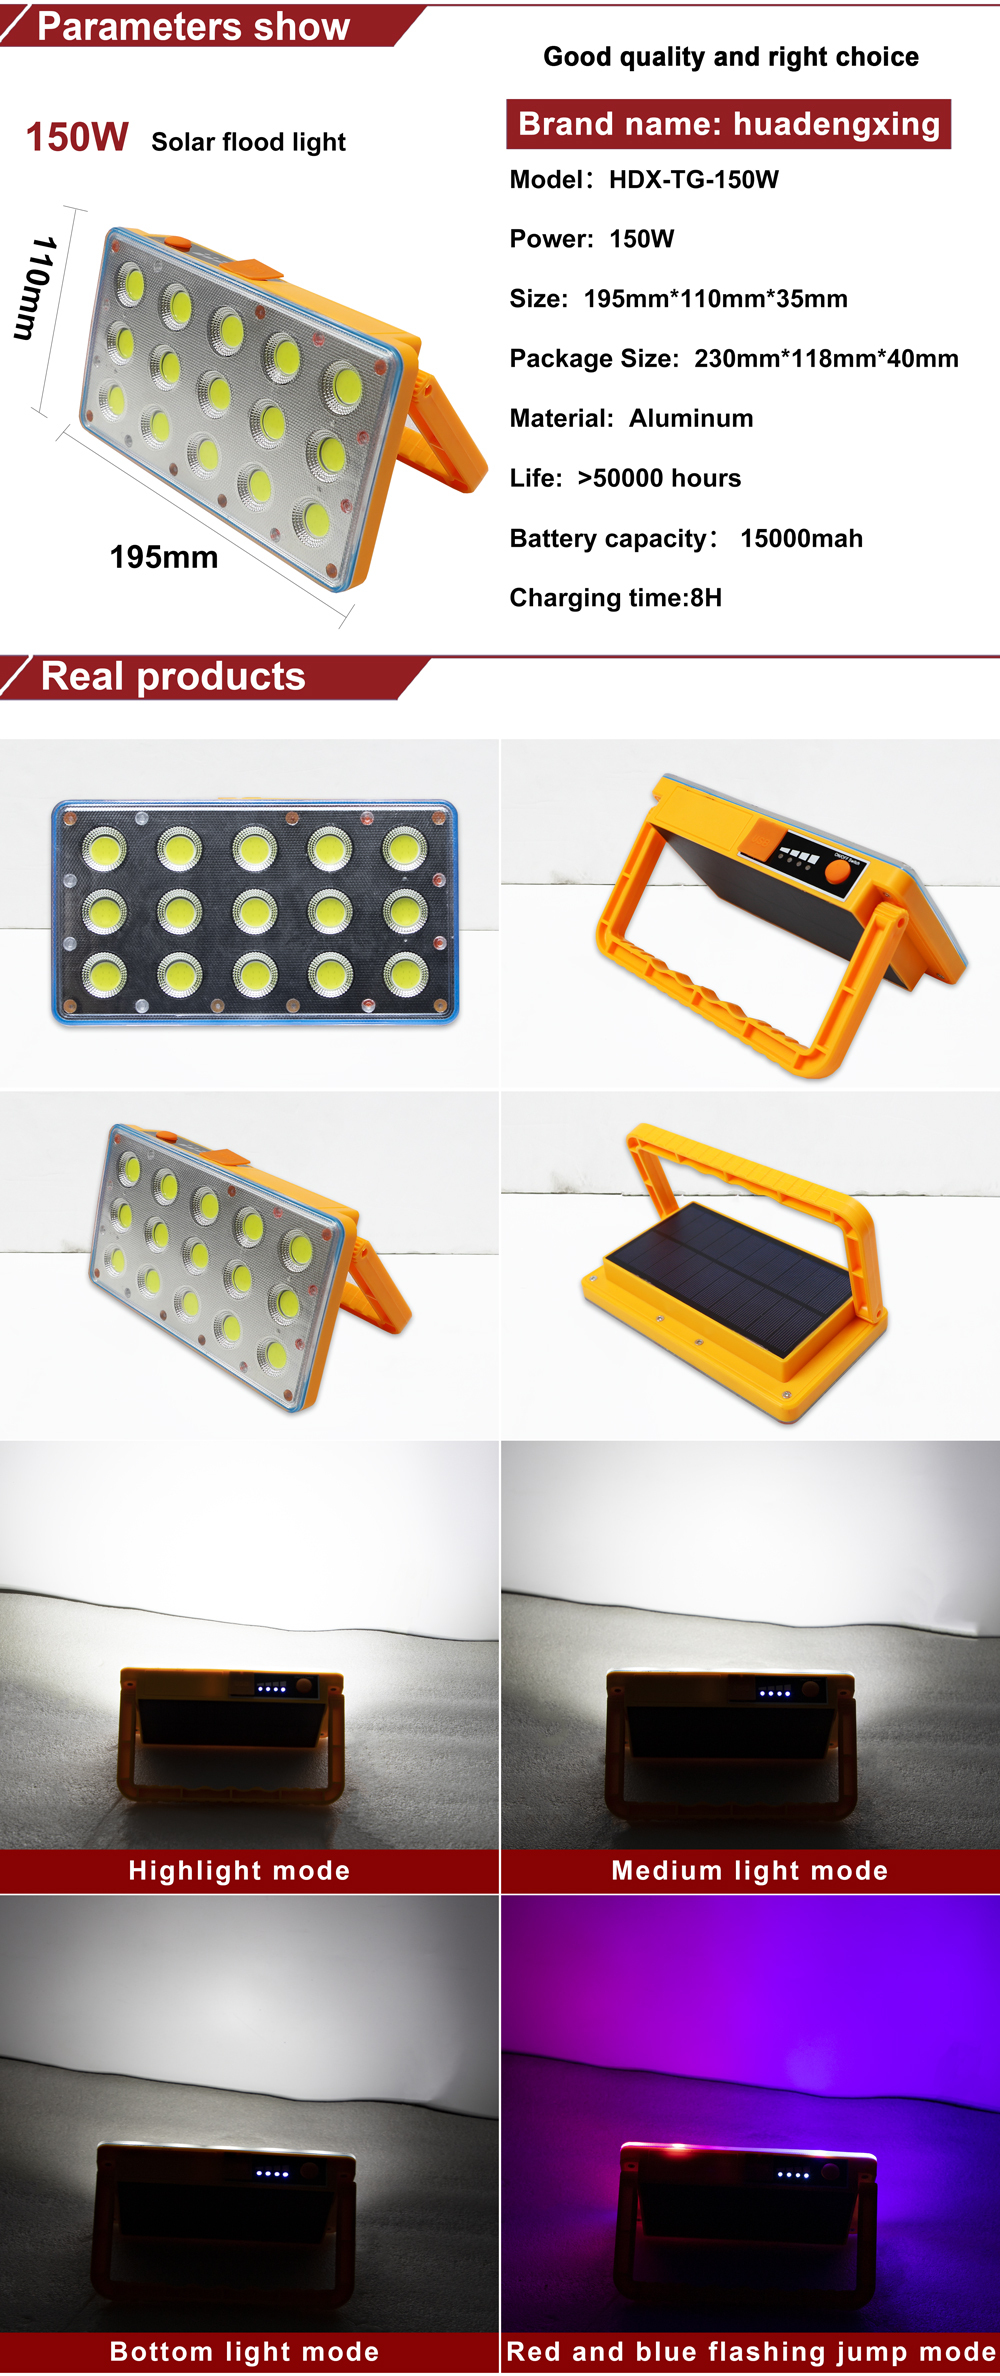 All In One mini led solar flood light 5 Modes Handheld USB Rechargeable Power Bank Charging Emergency portable glare work light LED solar flood light